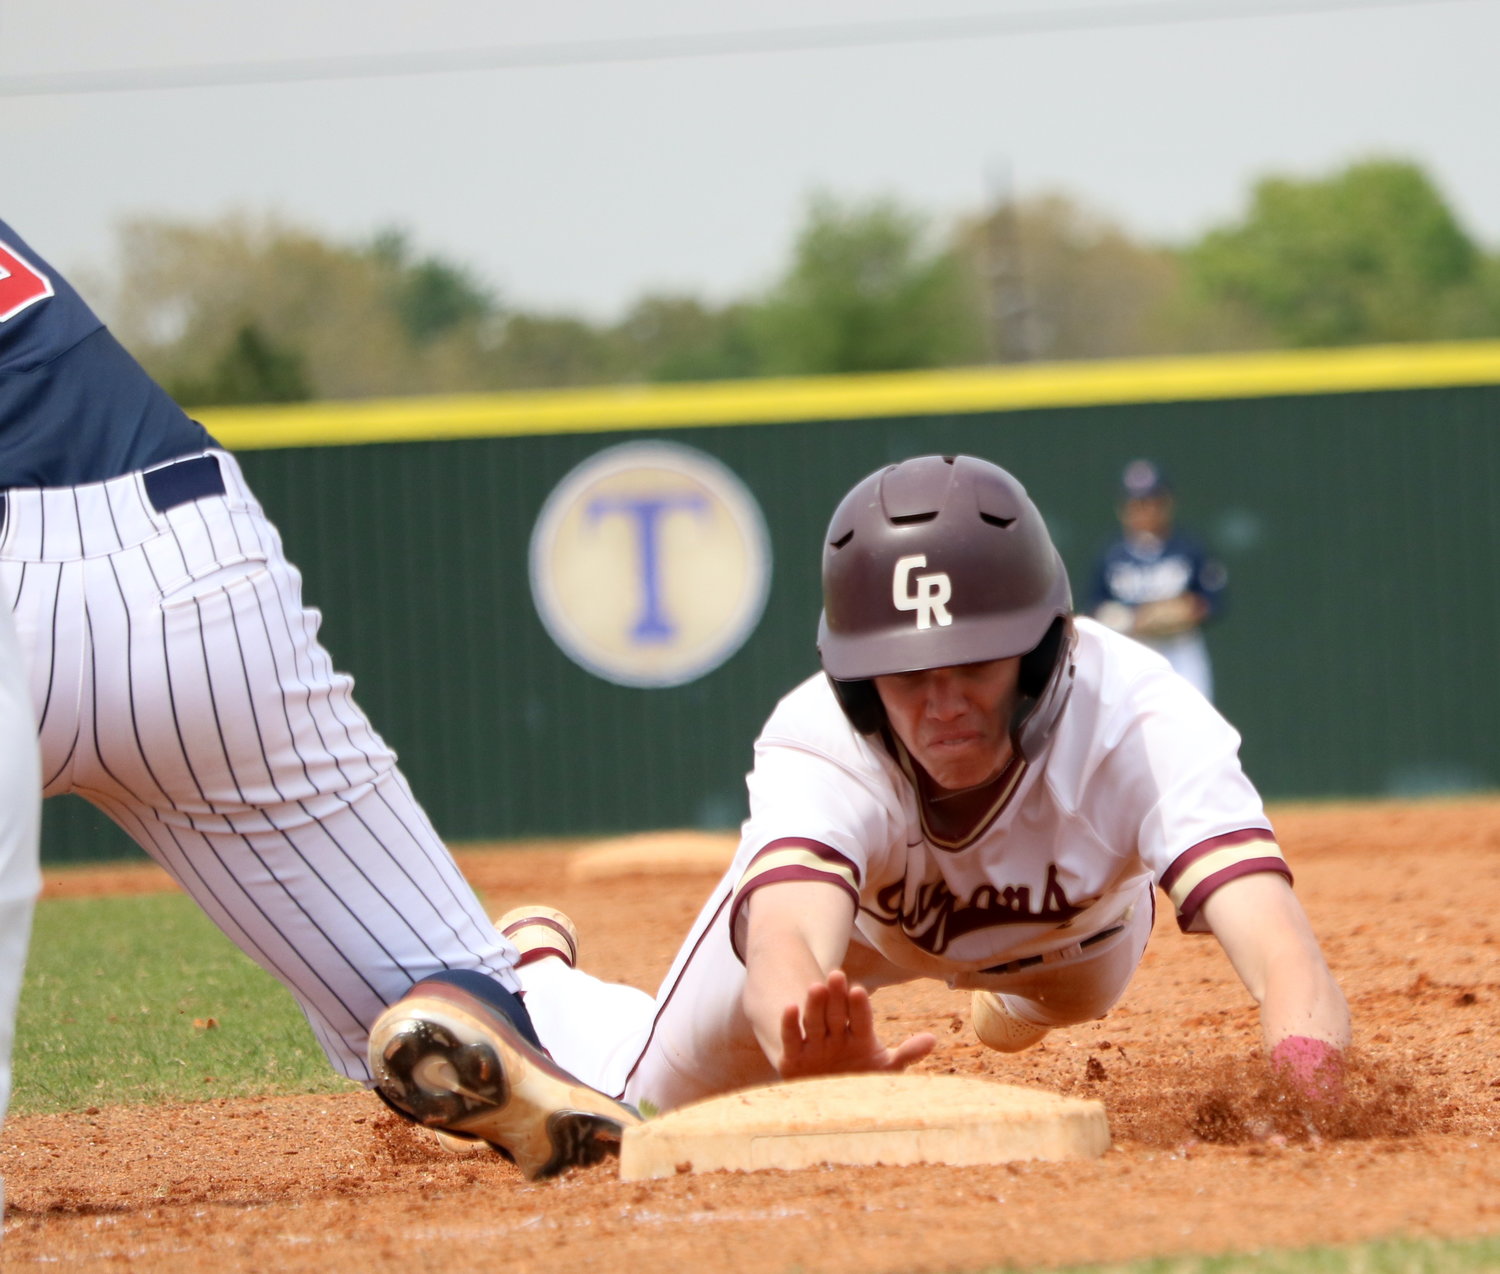 Brock DeYoung slides into first base during Tuesday's game between Tompkins and Cinco Ranch at the Cinco Ranch baseball field.